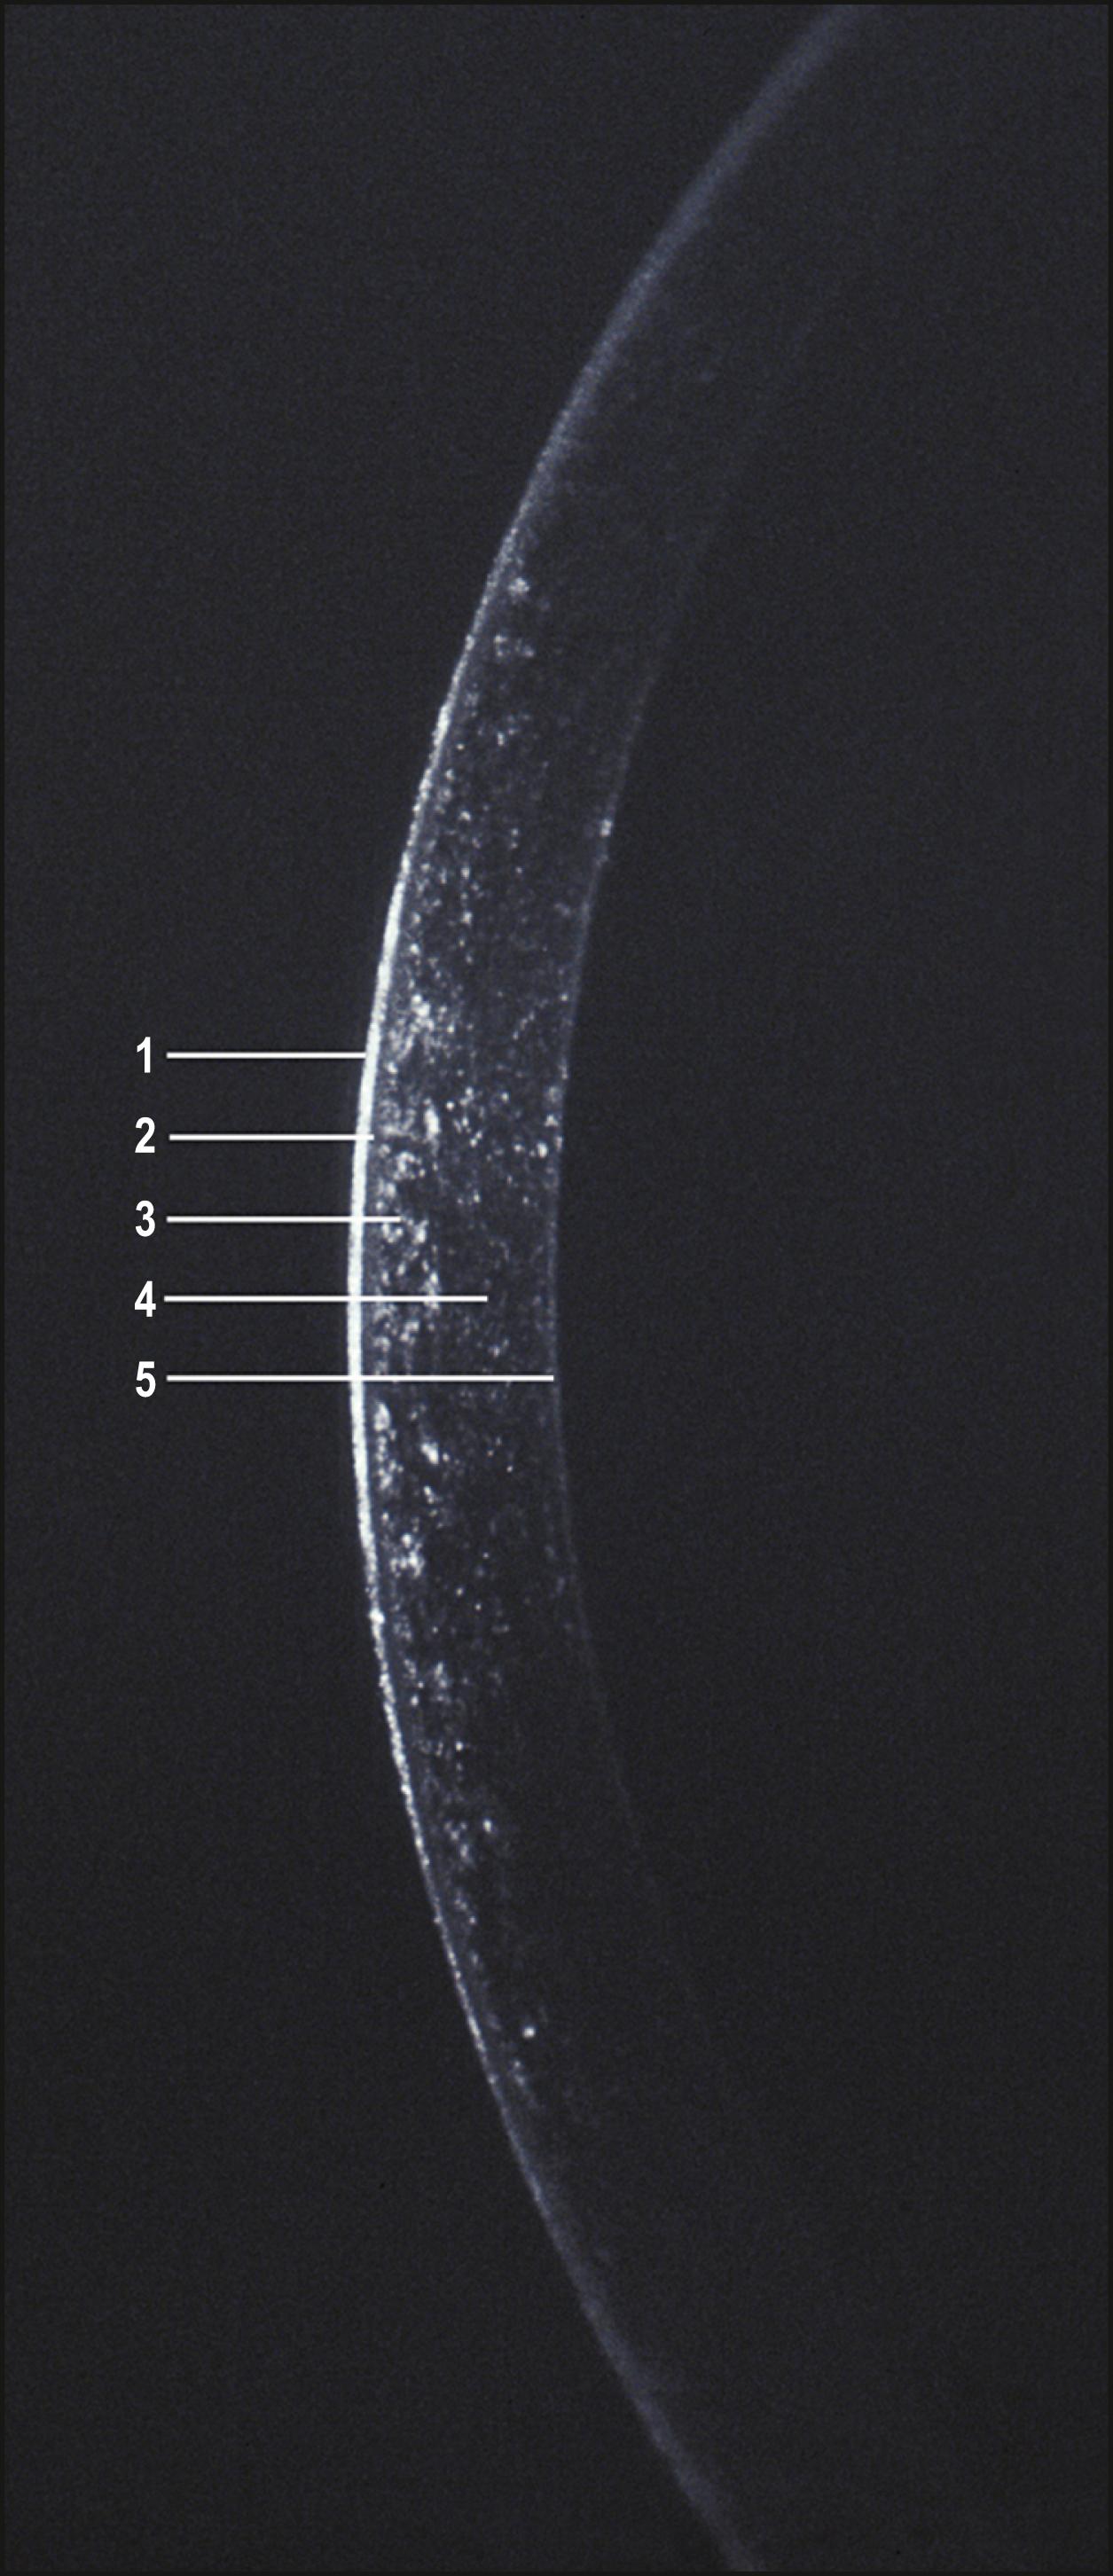 Fig. 7.12, Optical section through a normal cornea demonstrating its principal layers. (1) Tear film, (2) epithelium, (3) anterior stroma with high density of keratocytes, (4) posterior stroma with lower density of keratocytes, (5) posterior layer (Descemet membrane and endothelium).